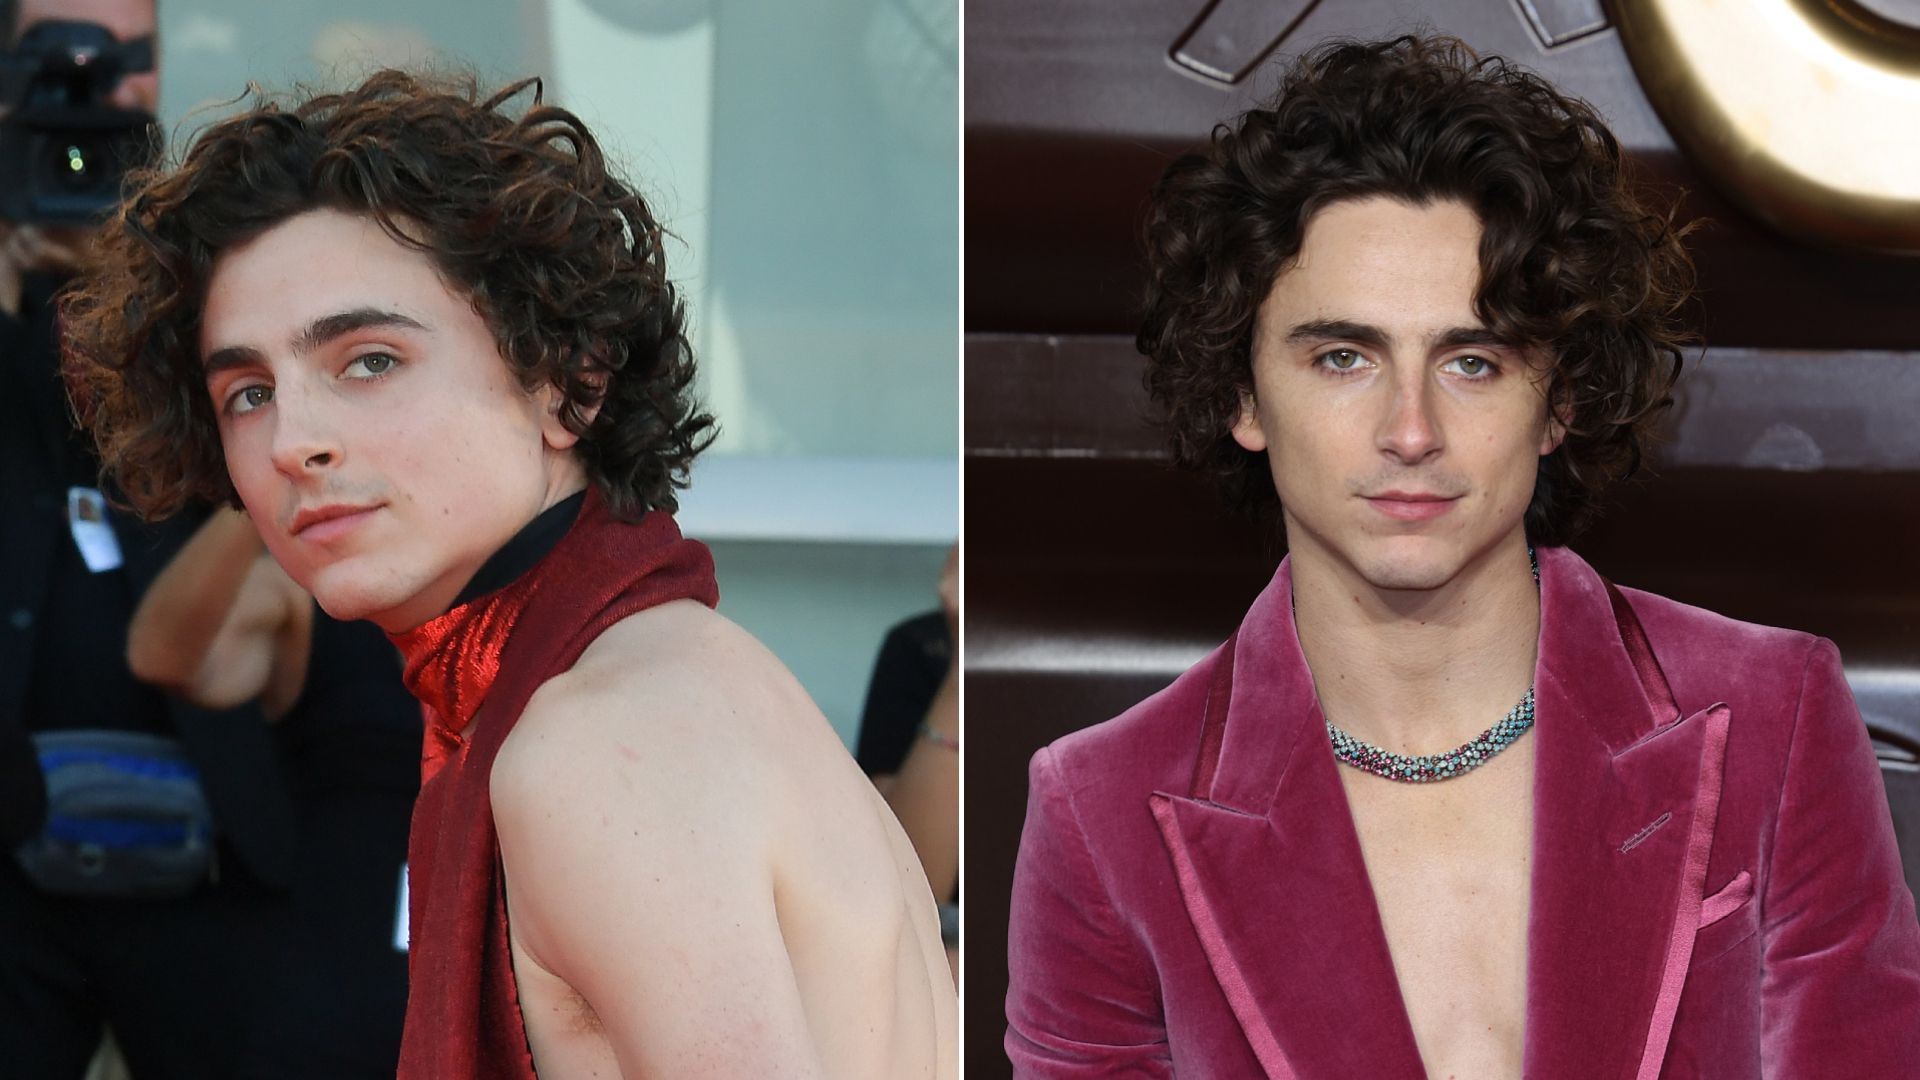 Timothée Chalamet at the 2022 Venice Film Festival (L) and the "Wonka" Premiere in 2023 (R)